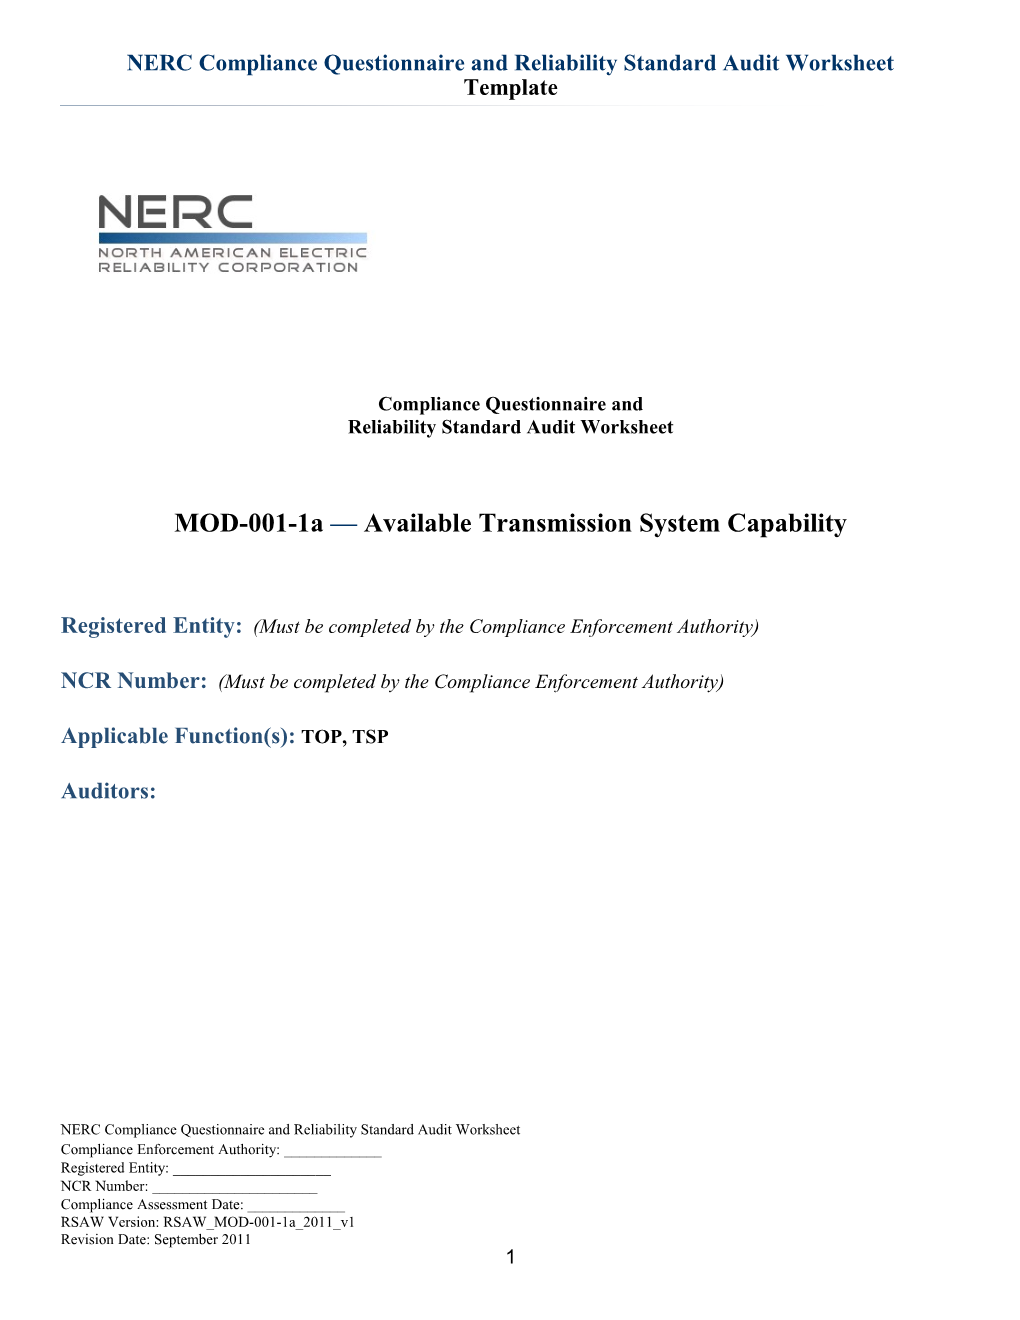 Available Transmission System Capability